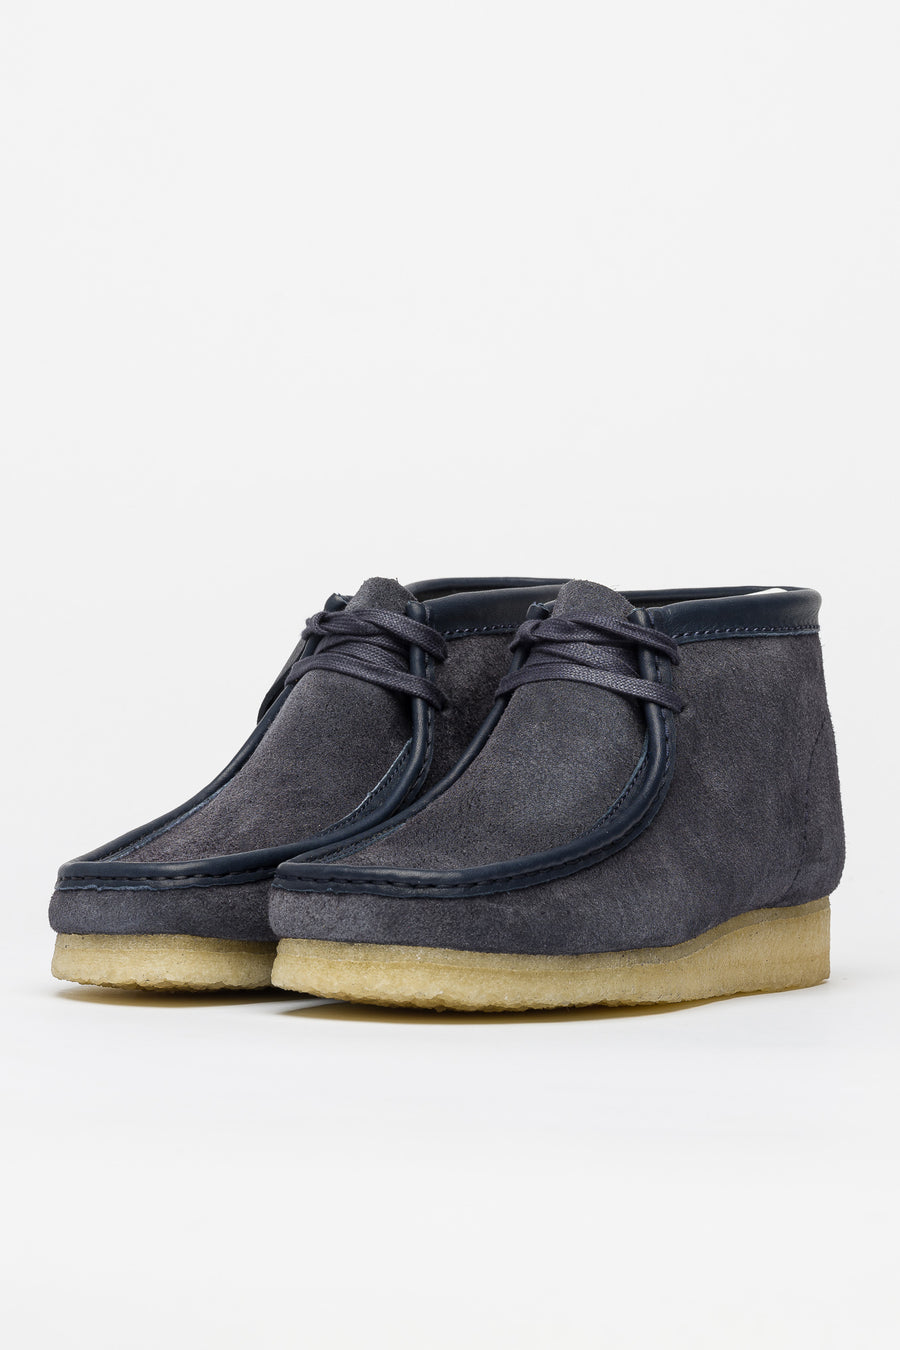 navy blue clarks wallabees